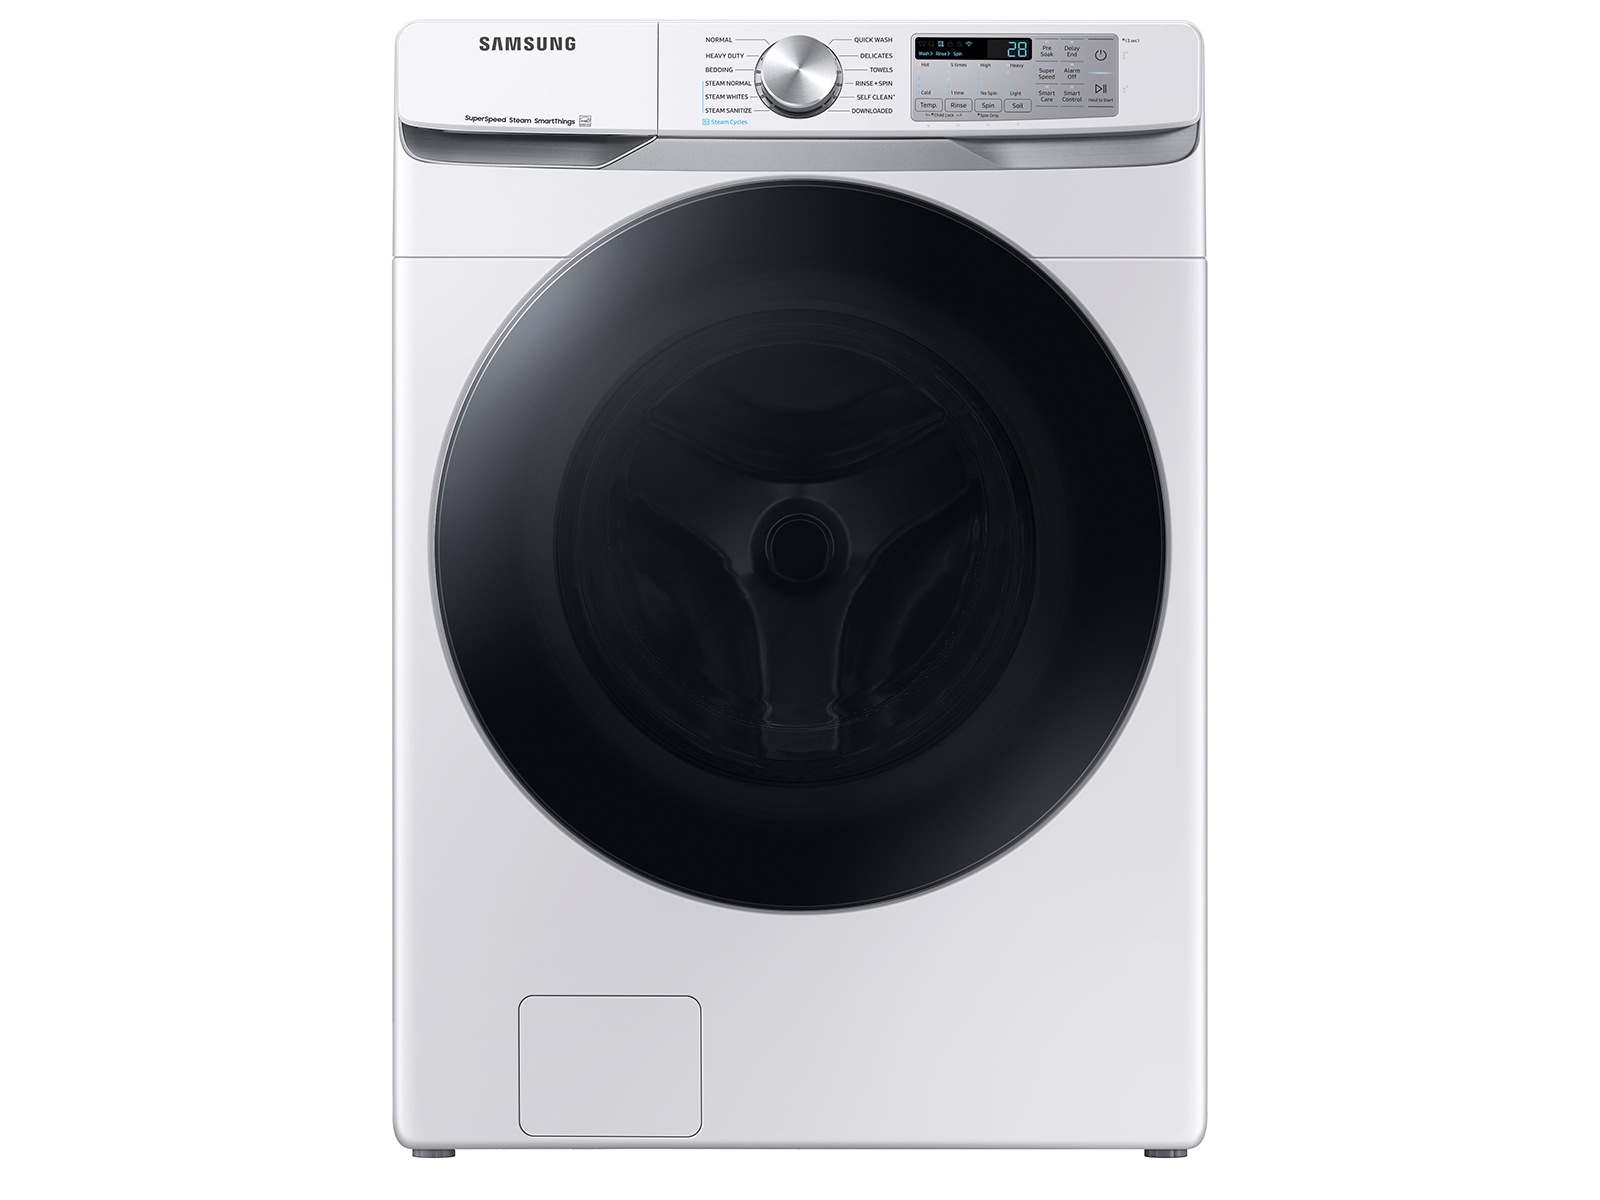 Samsung 4.5 cu. ft. Large Capacity Smart Front Load Washer with Super Speed Wash in White(WF45B6300AW/US)